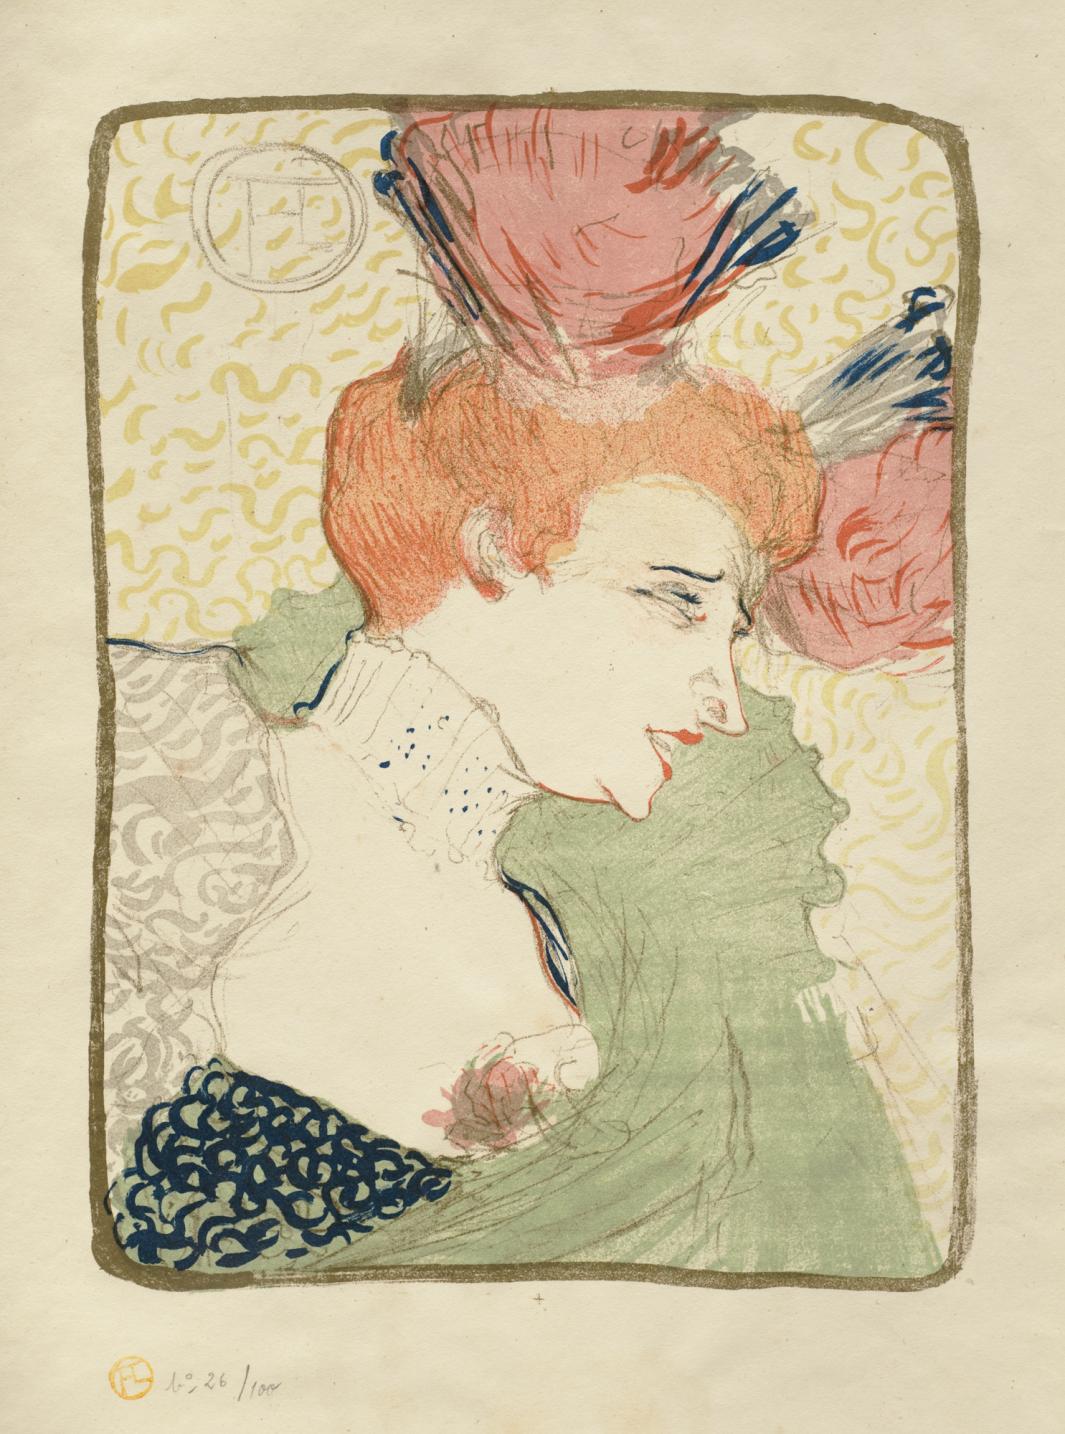 Color print of woman in profile with hair ornaments